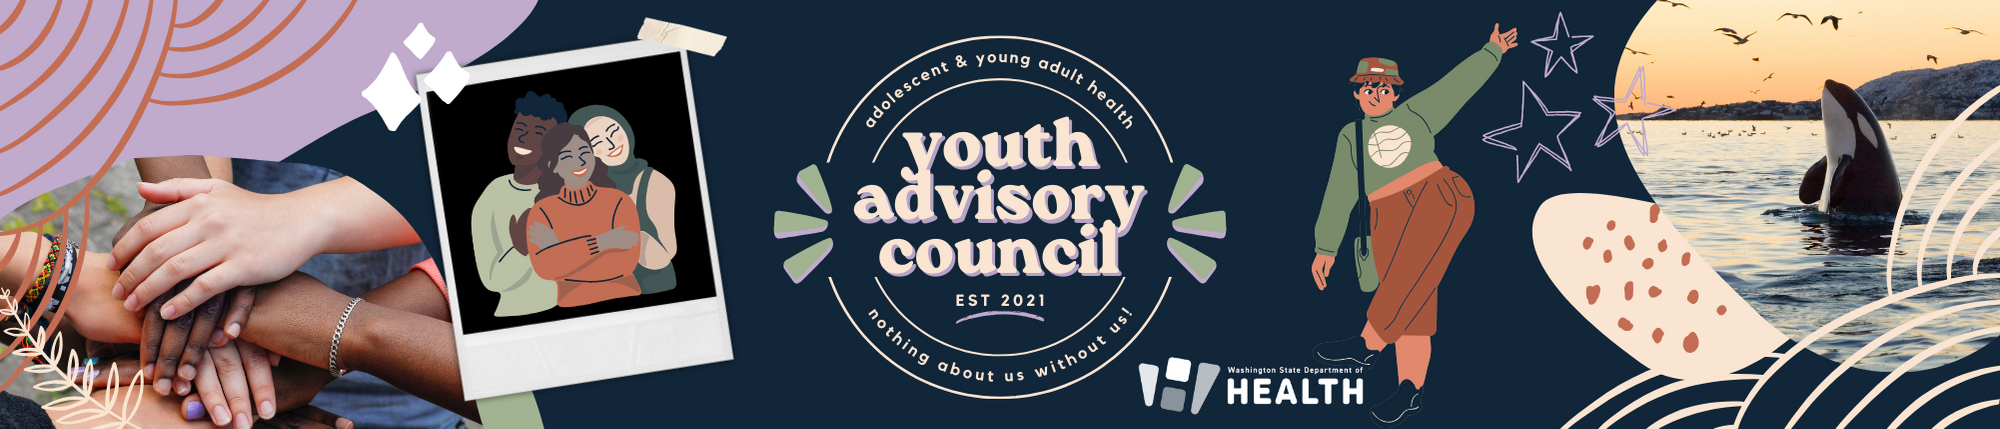 Youth advisory council graphic with pictures and images of young people and washington animals.